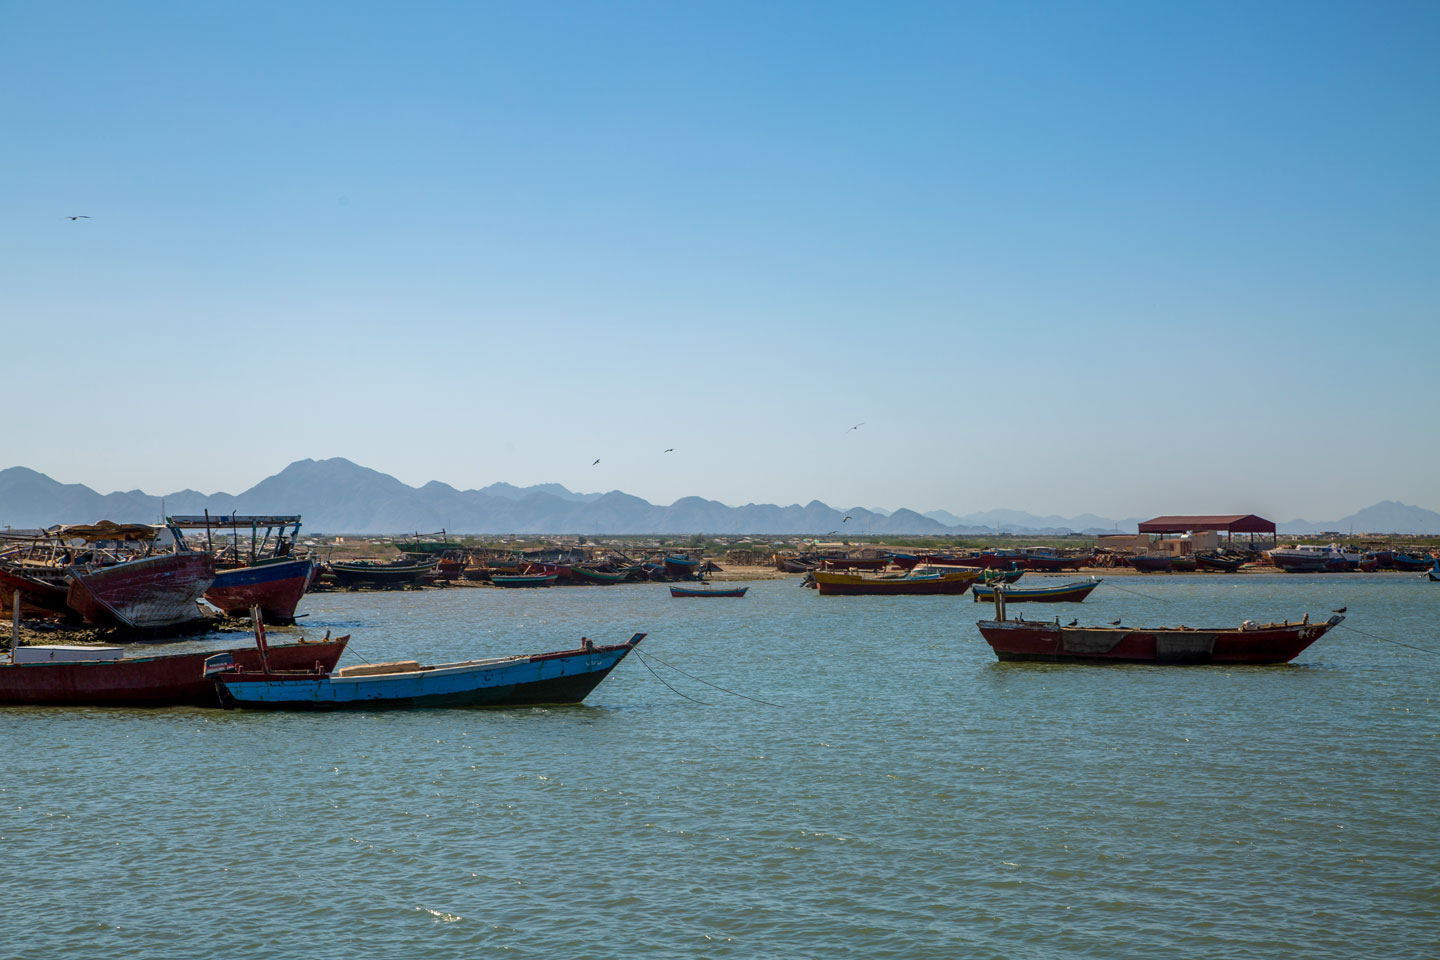 Boats in the Red Sea, the Red Sea Hills in the background, Sudan